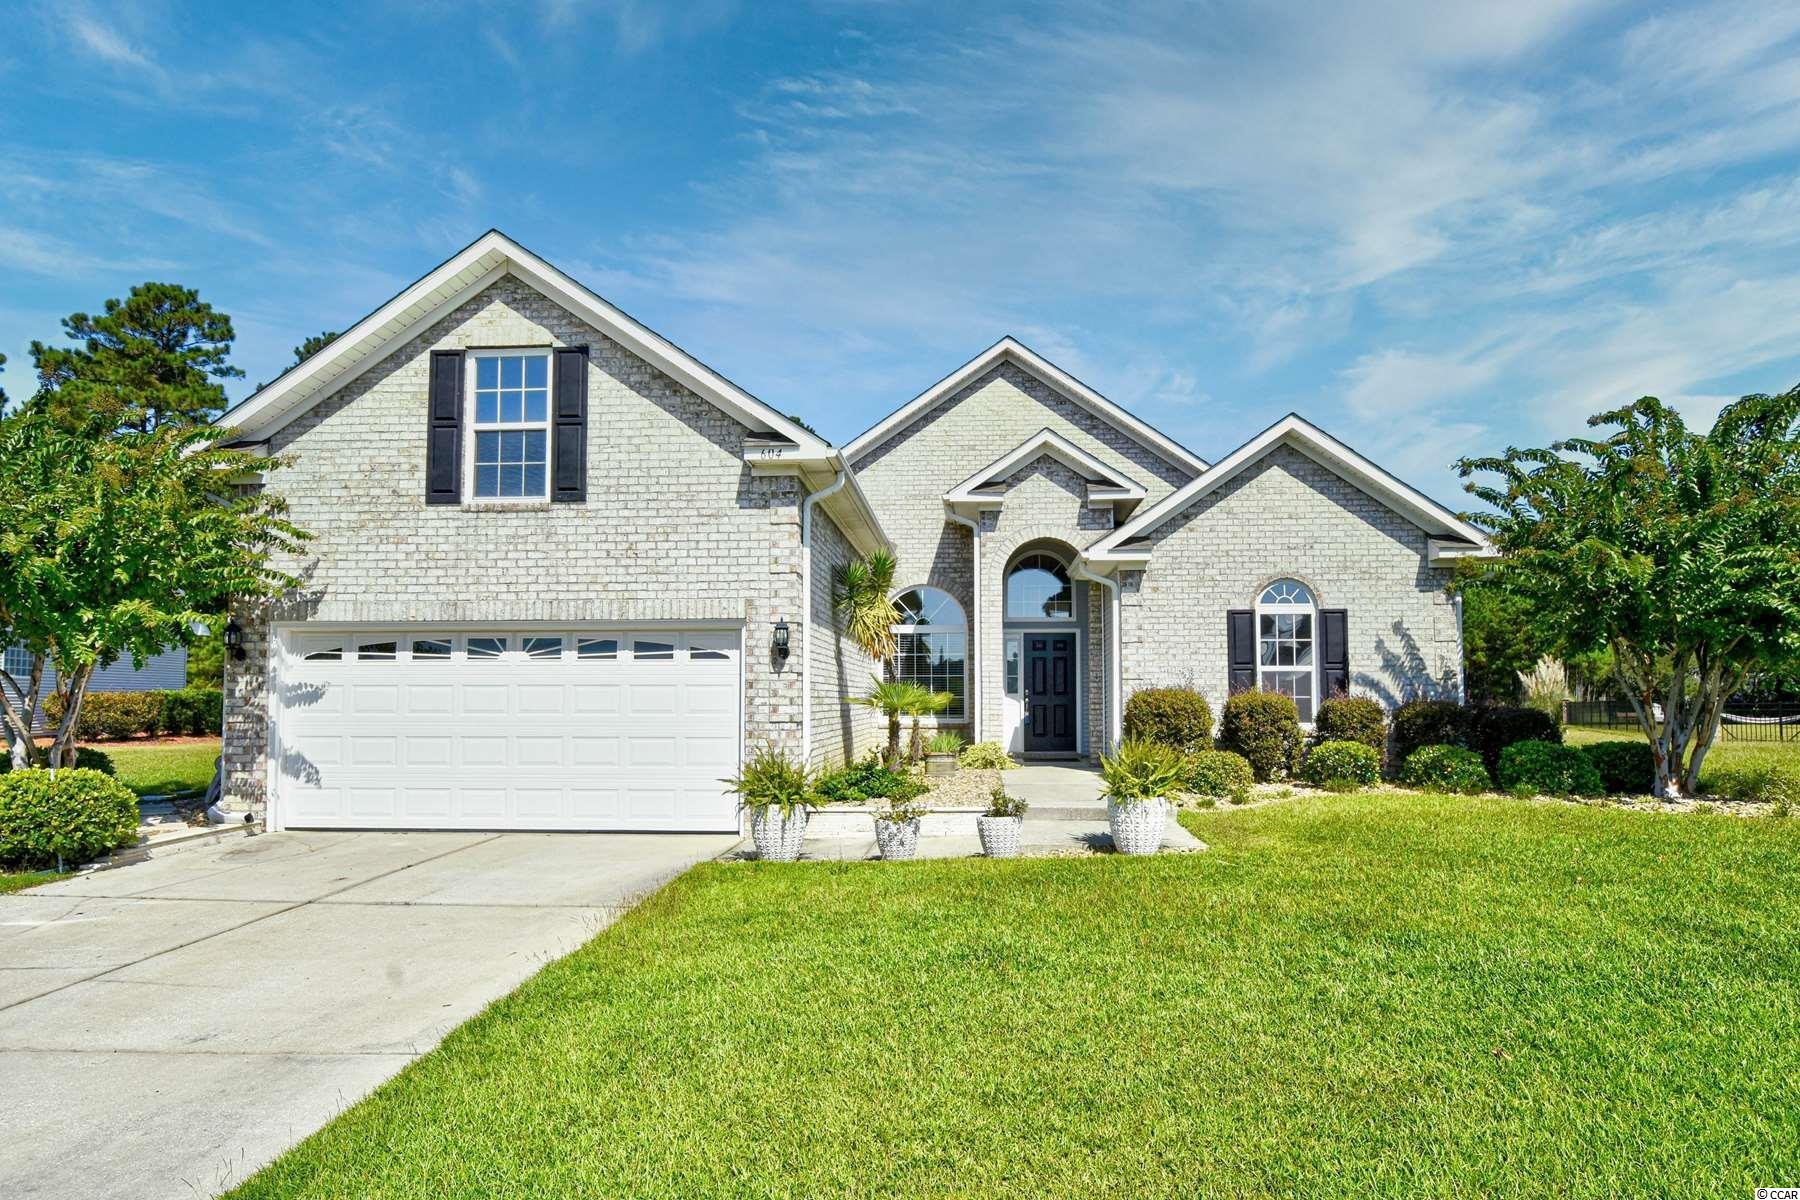 604 Tinkers Dr. Surfside Beach, SC 29575